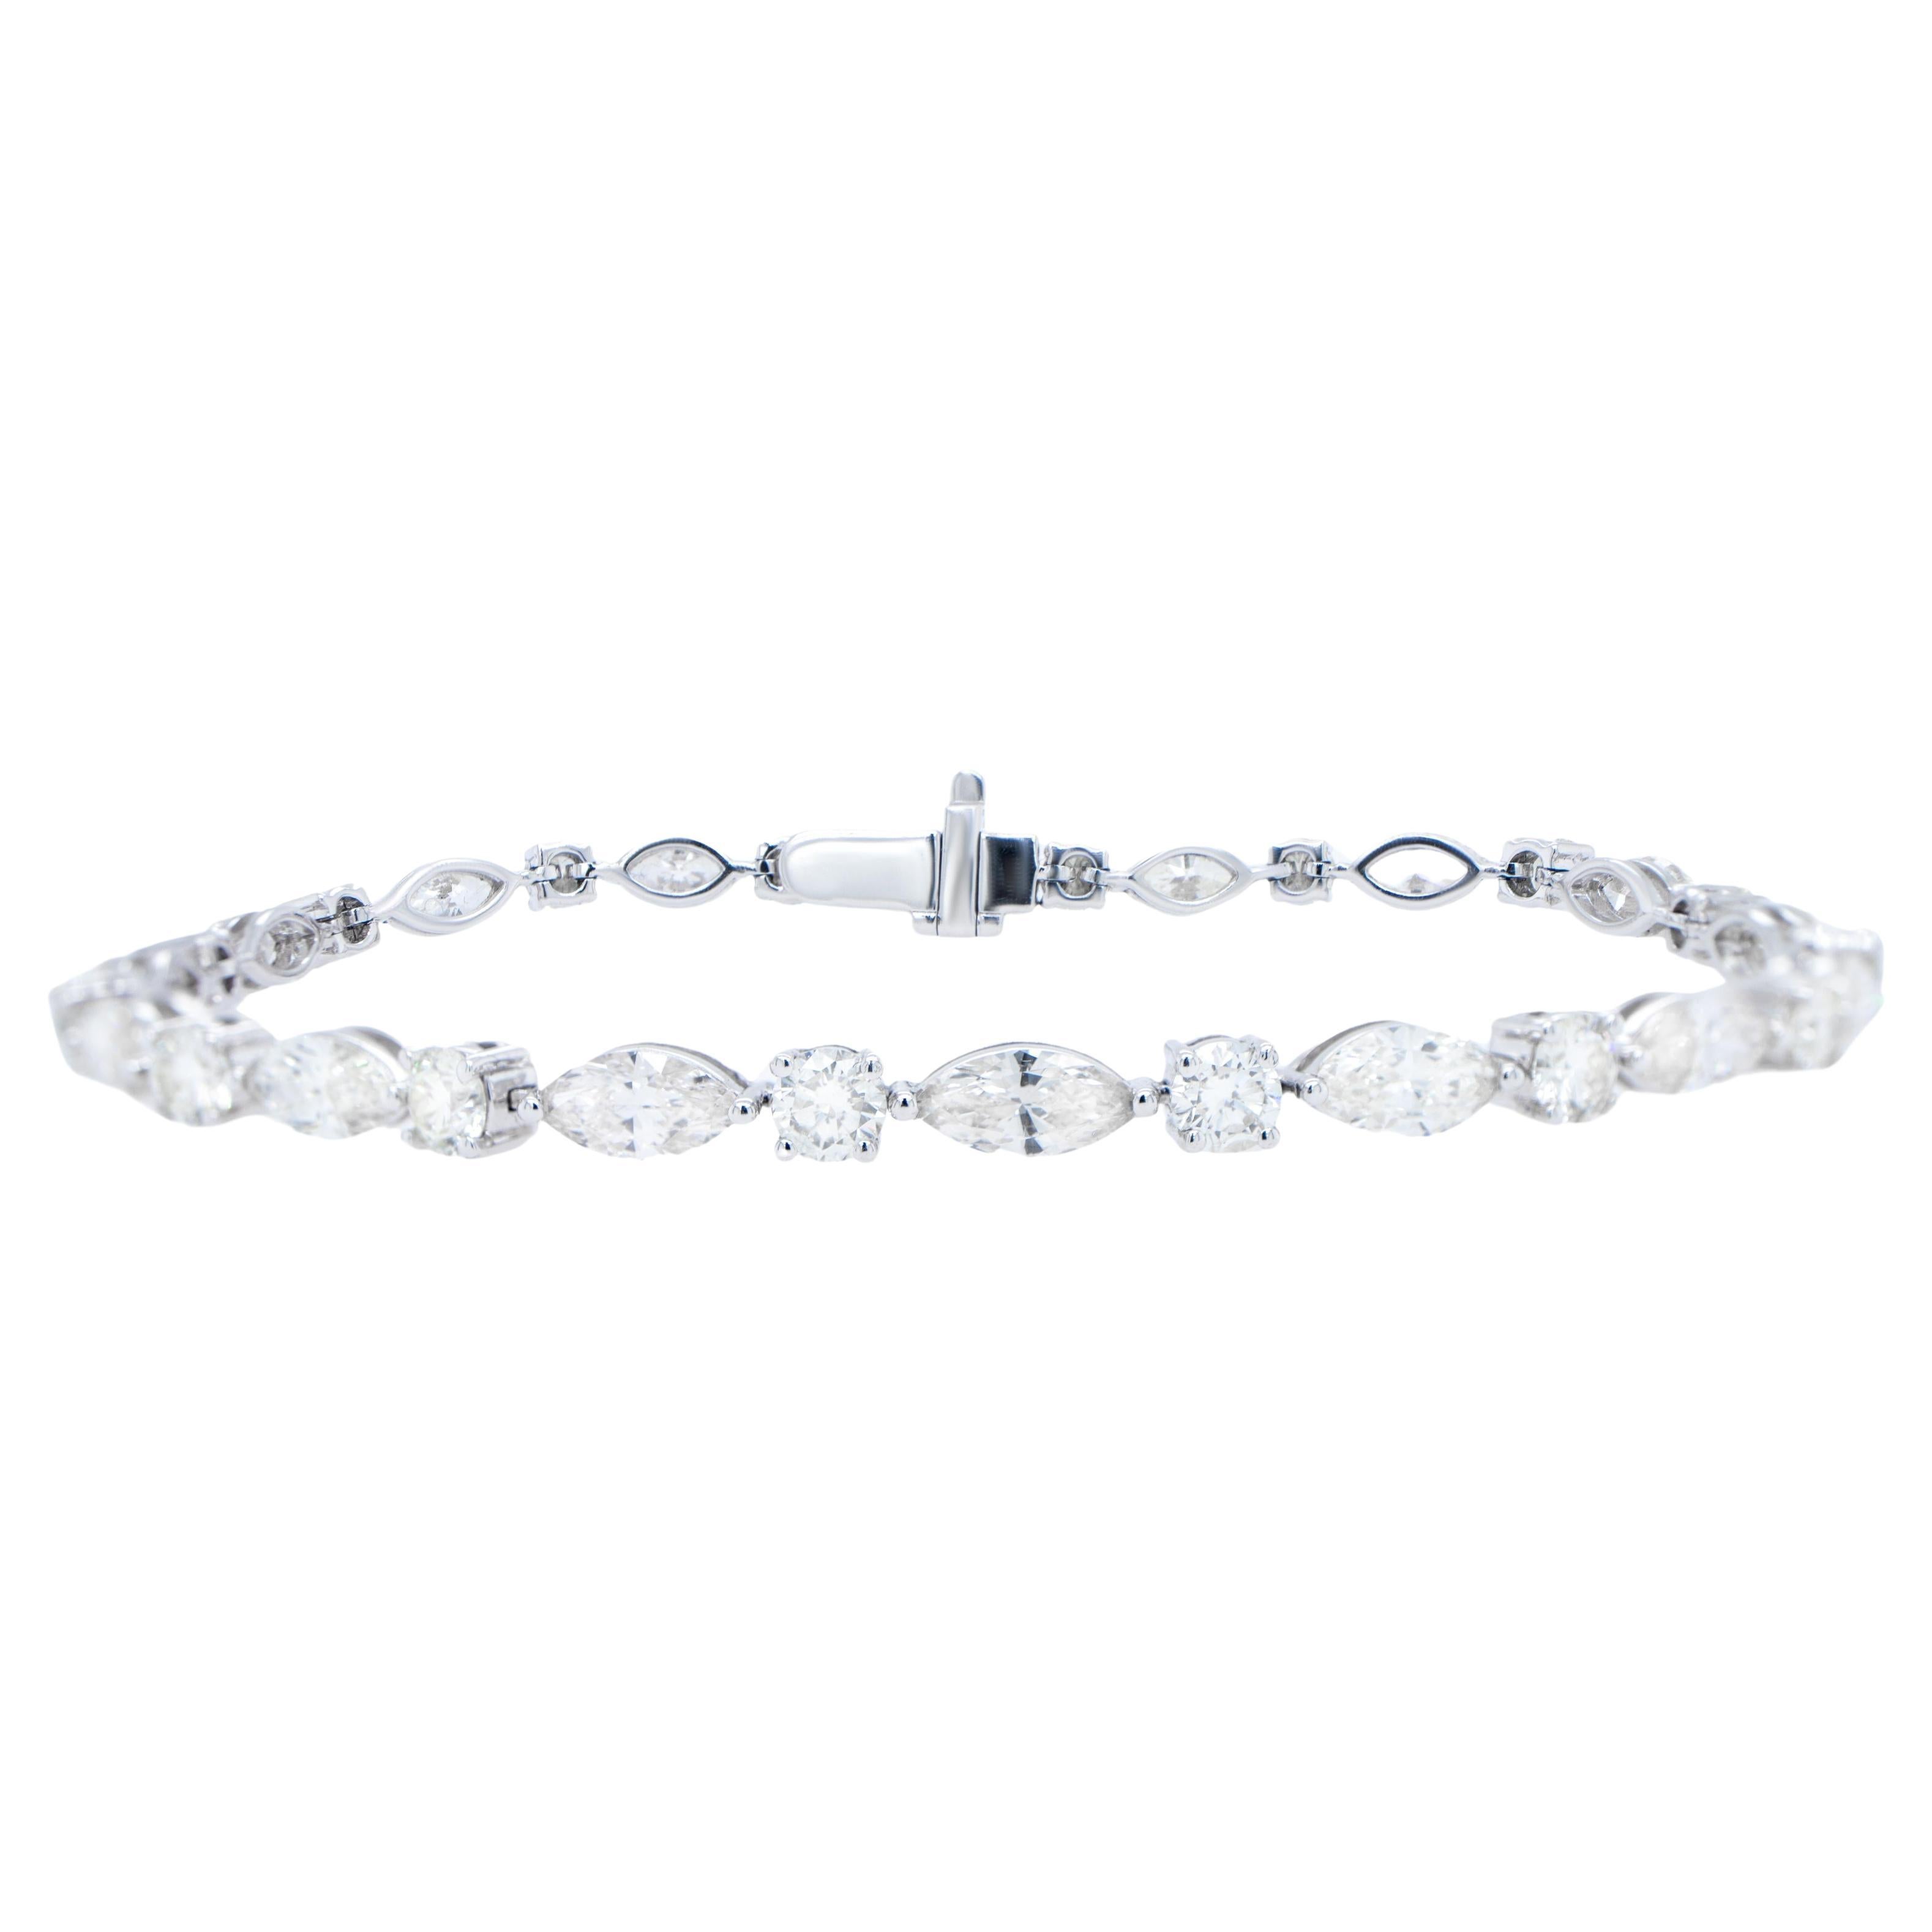 IDL Certified Diamond Tennis Bracelet Marquise and Round Cut 7.38 Carats 18K For Sale